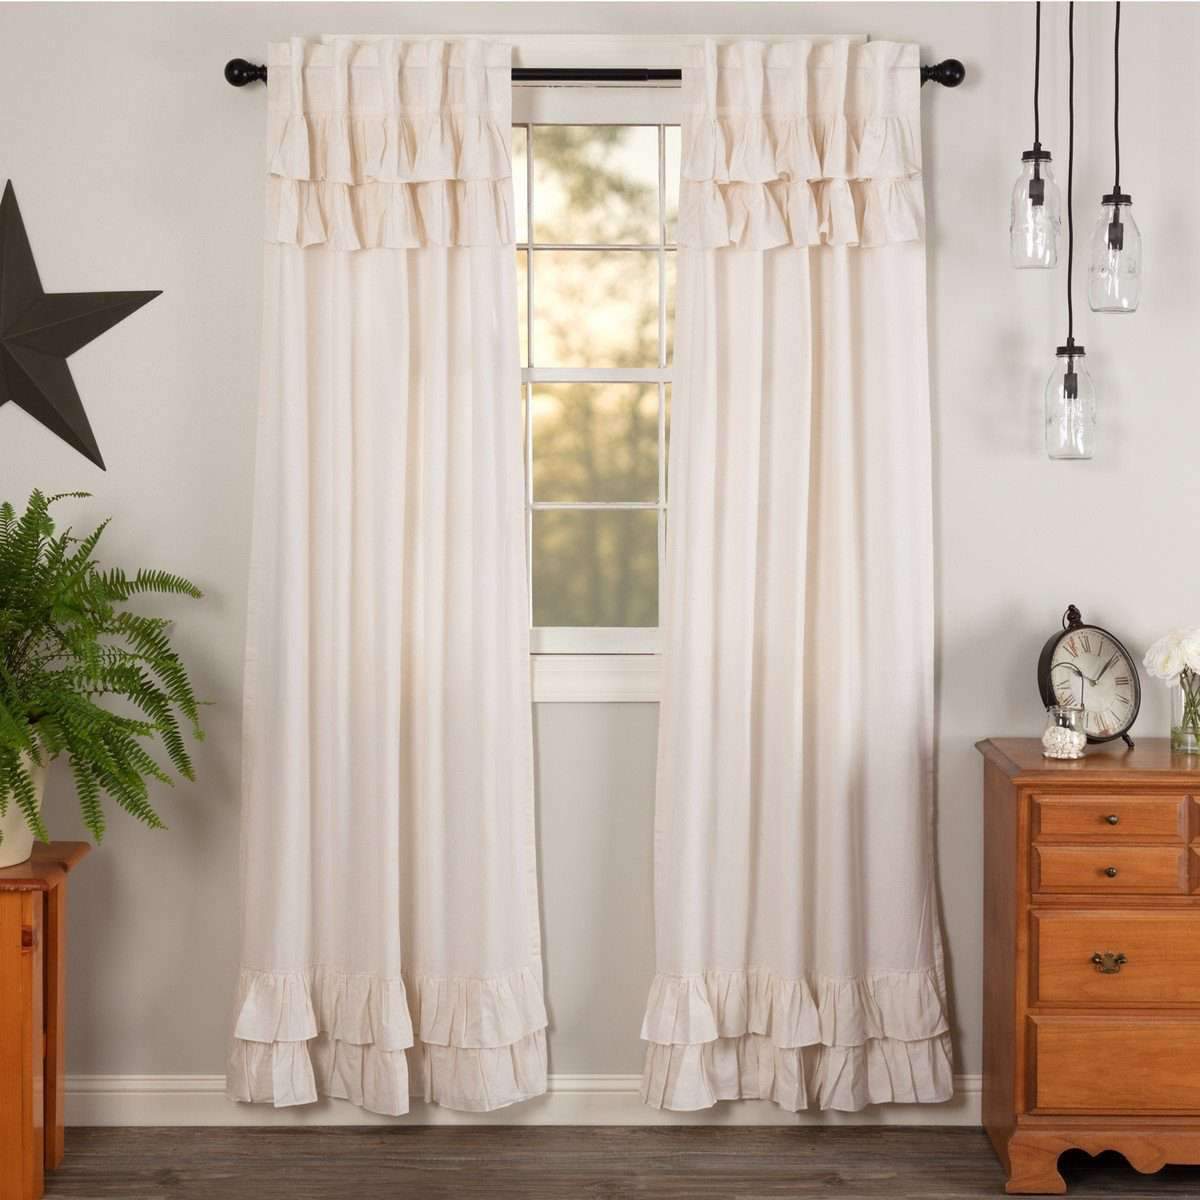 Simple Life Flax Antique White Ruffled Panel Country Curtain Set of 2 84"x40" - The Fox Decor